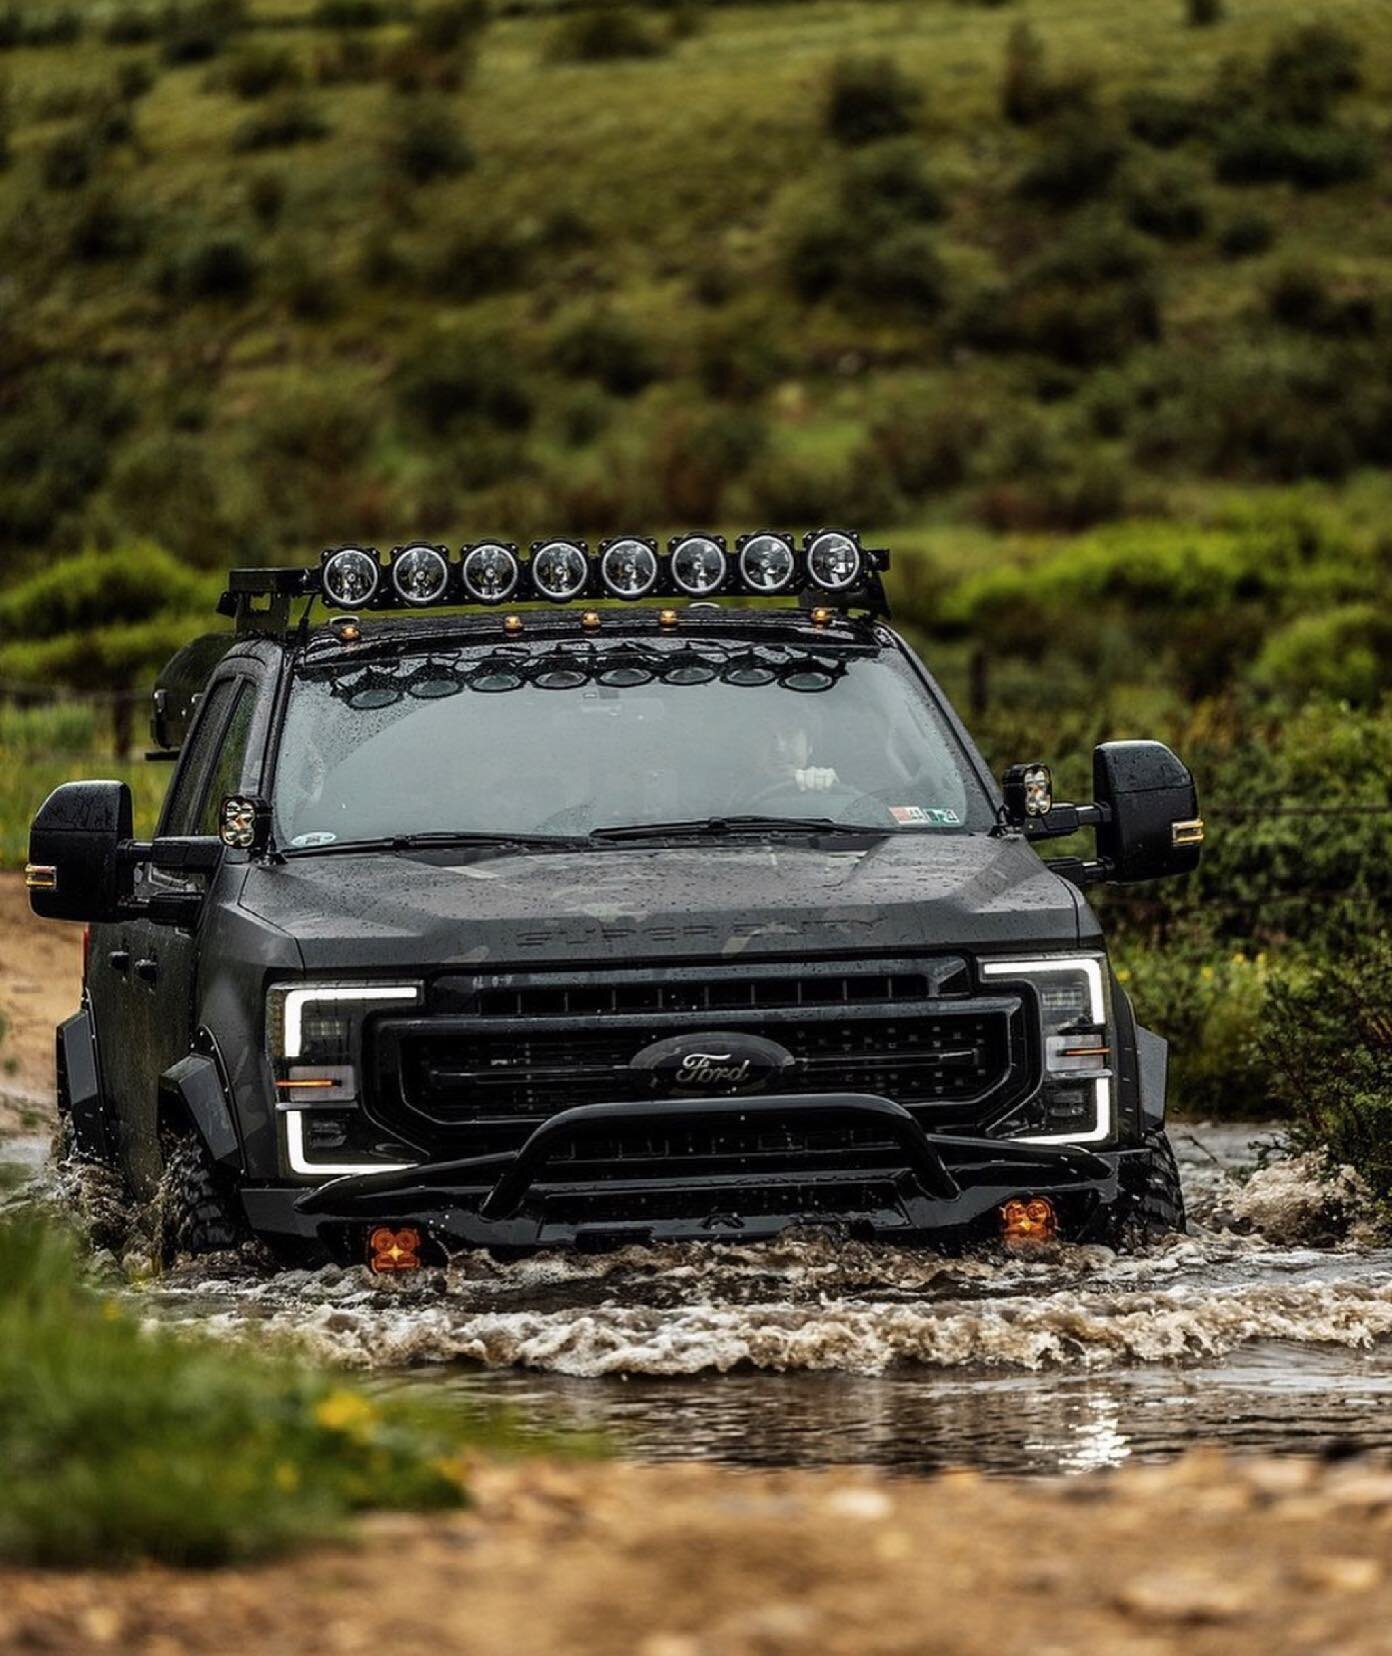 Are full size trucks really that limiting on trails in Colorado? Or is the extra space and power worth it?
@lastlineofdefense